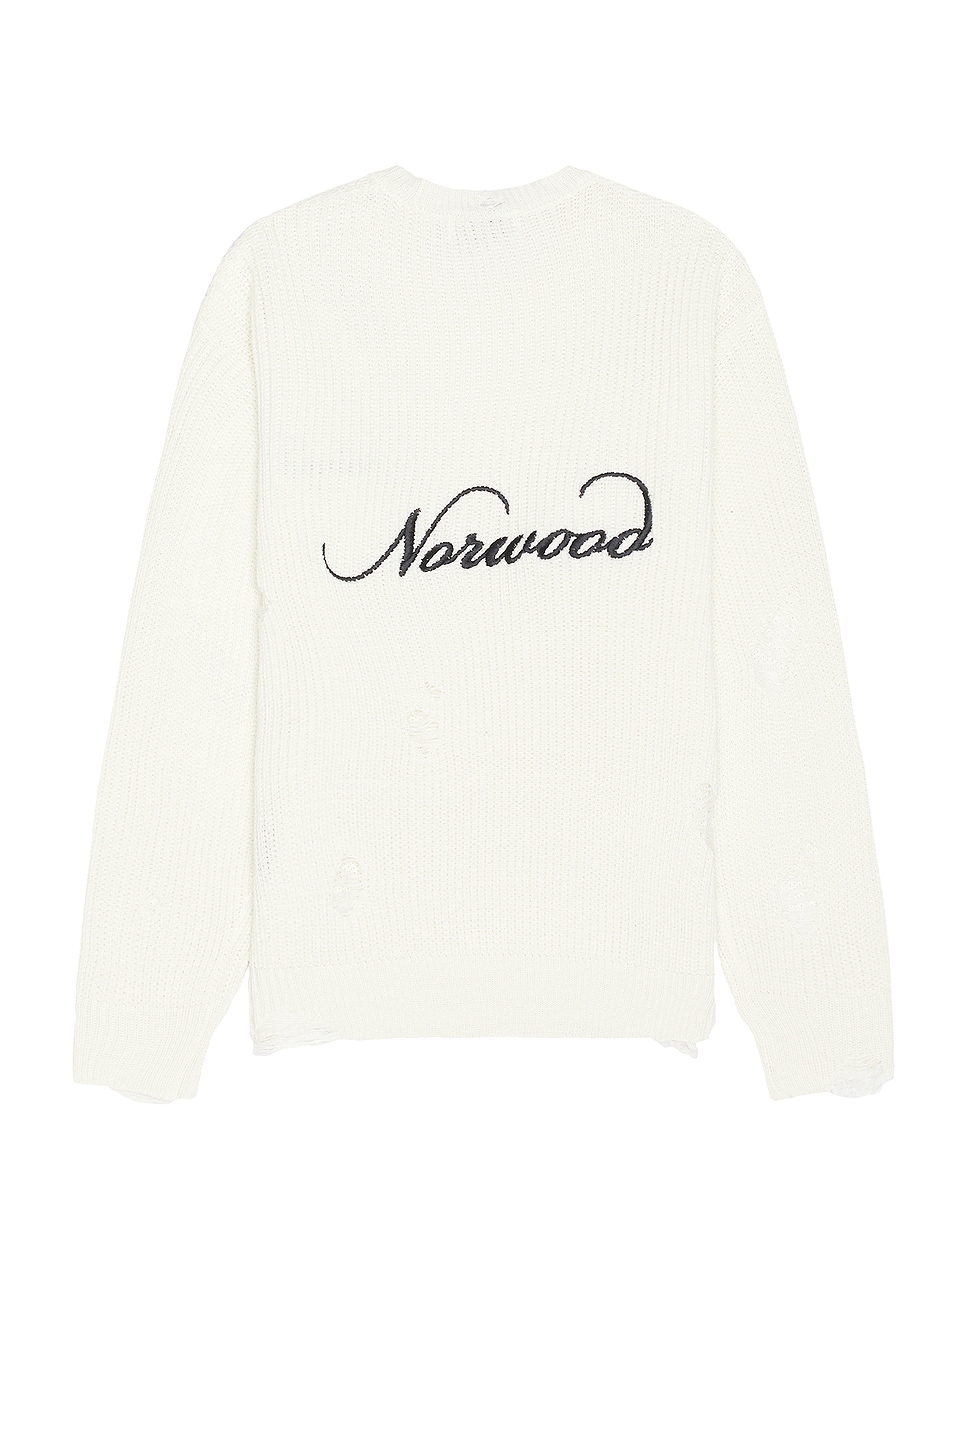 Image 1 of Norwood Distressed Logo Sweater in Cream